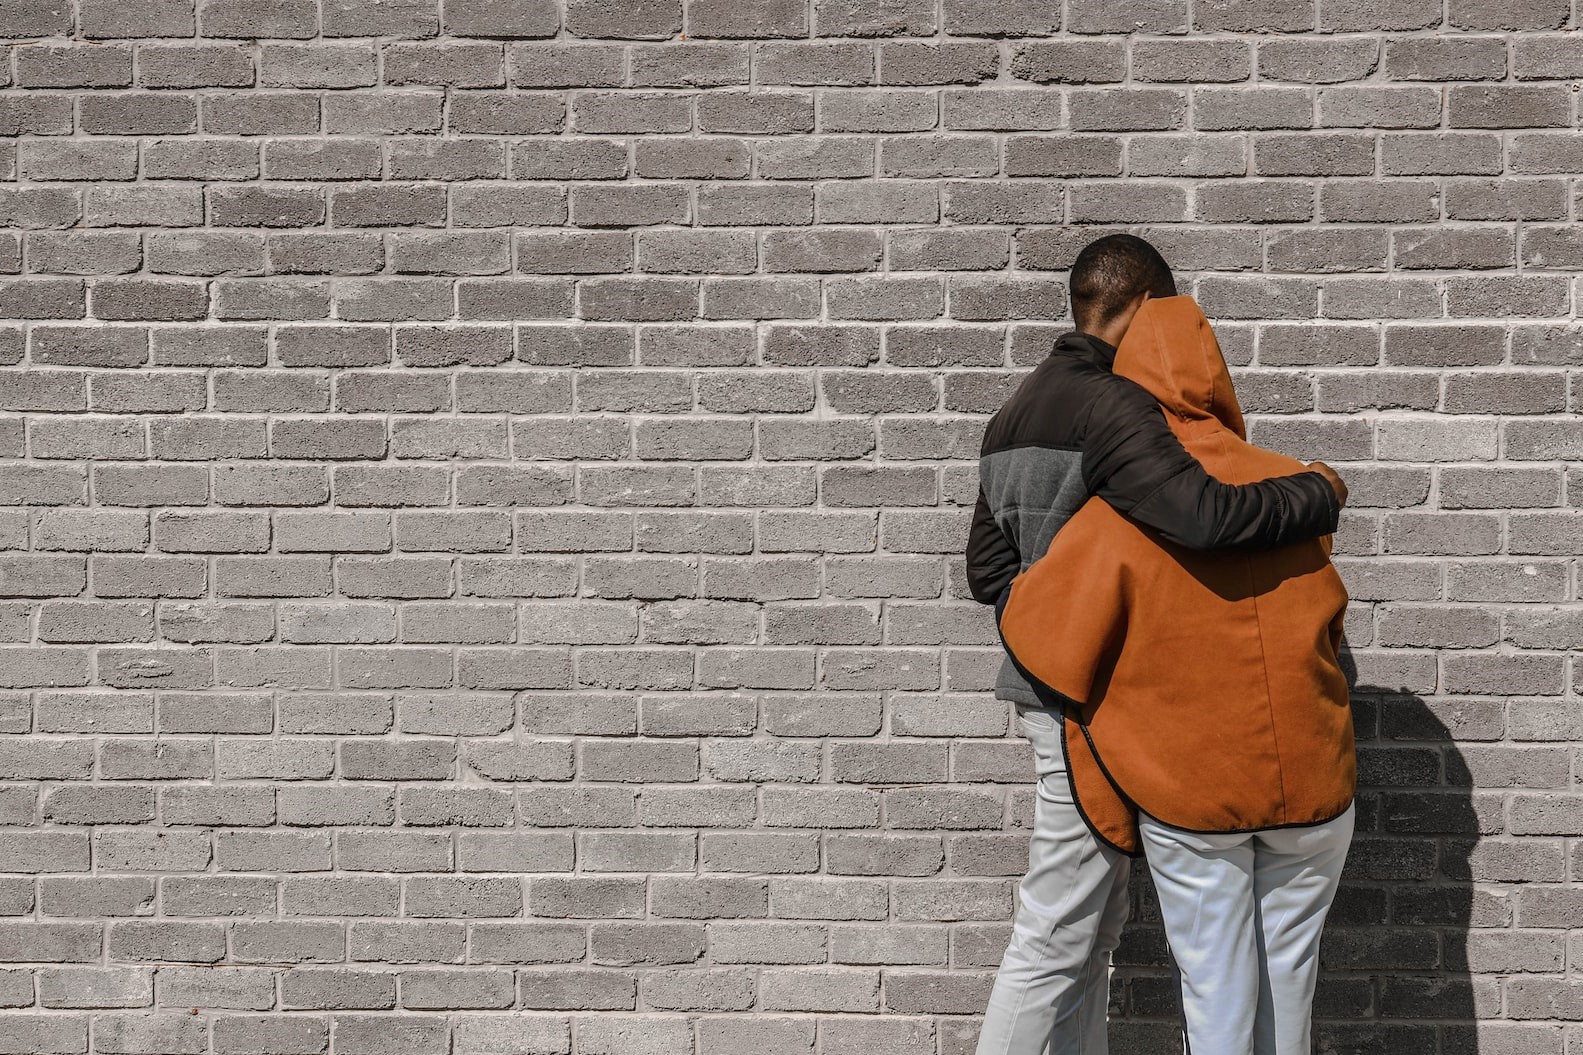 Two people hugging in front of a brick wall